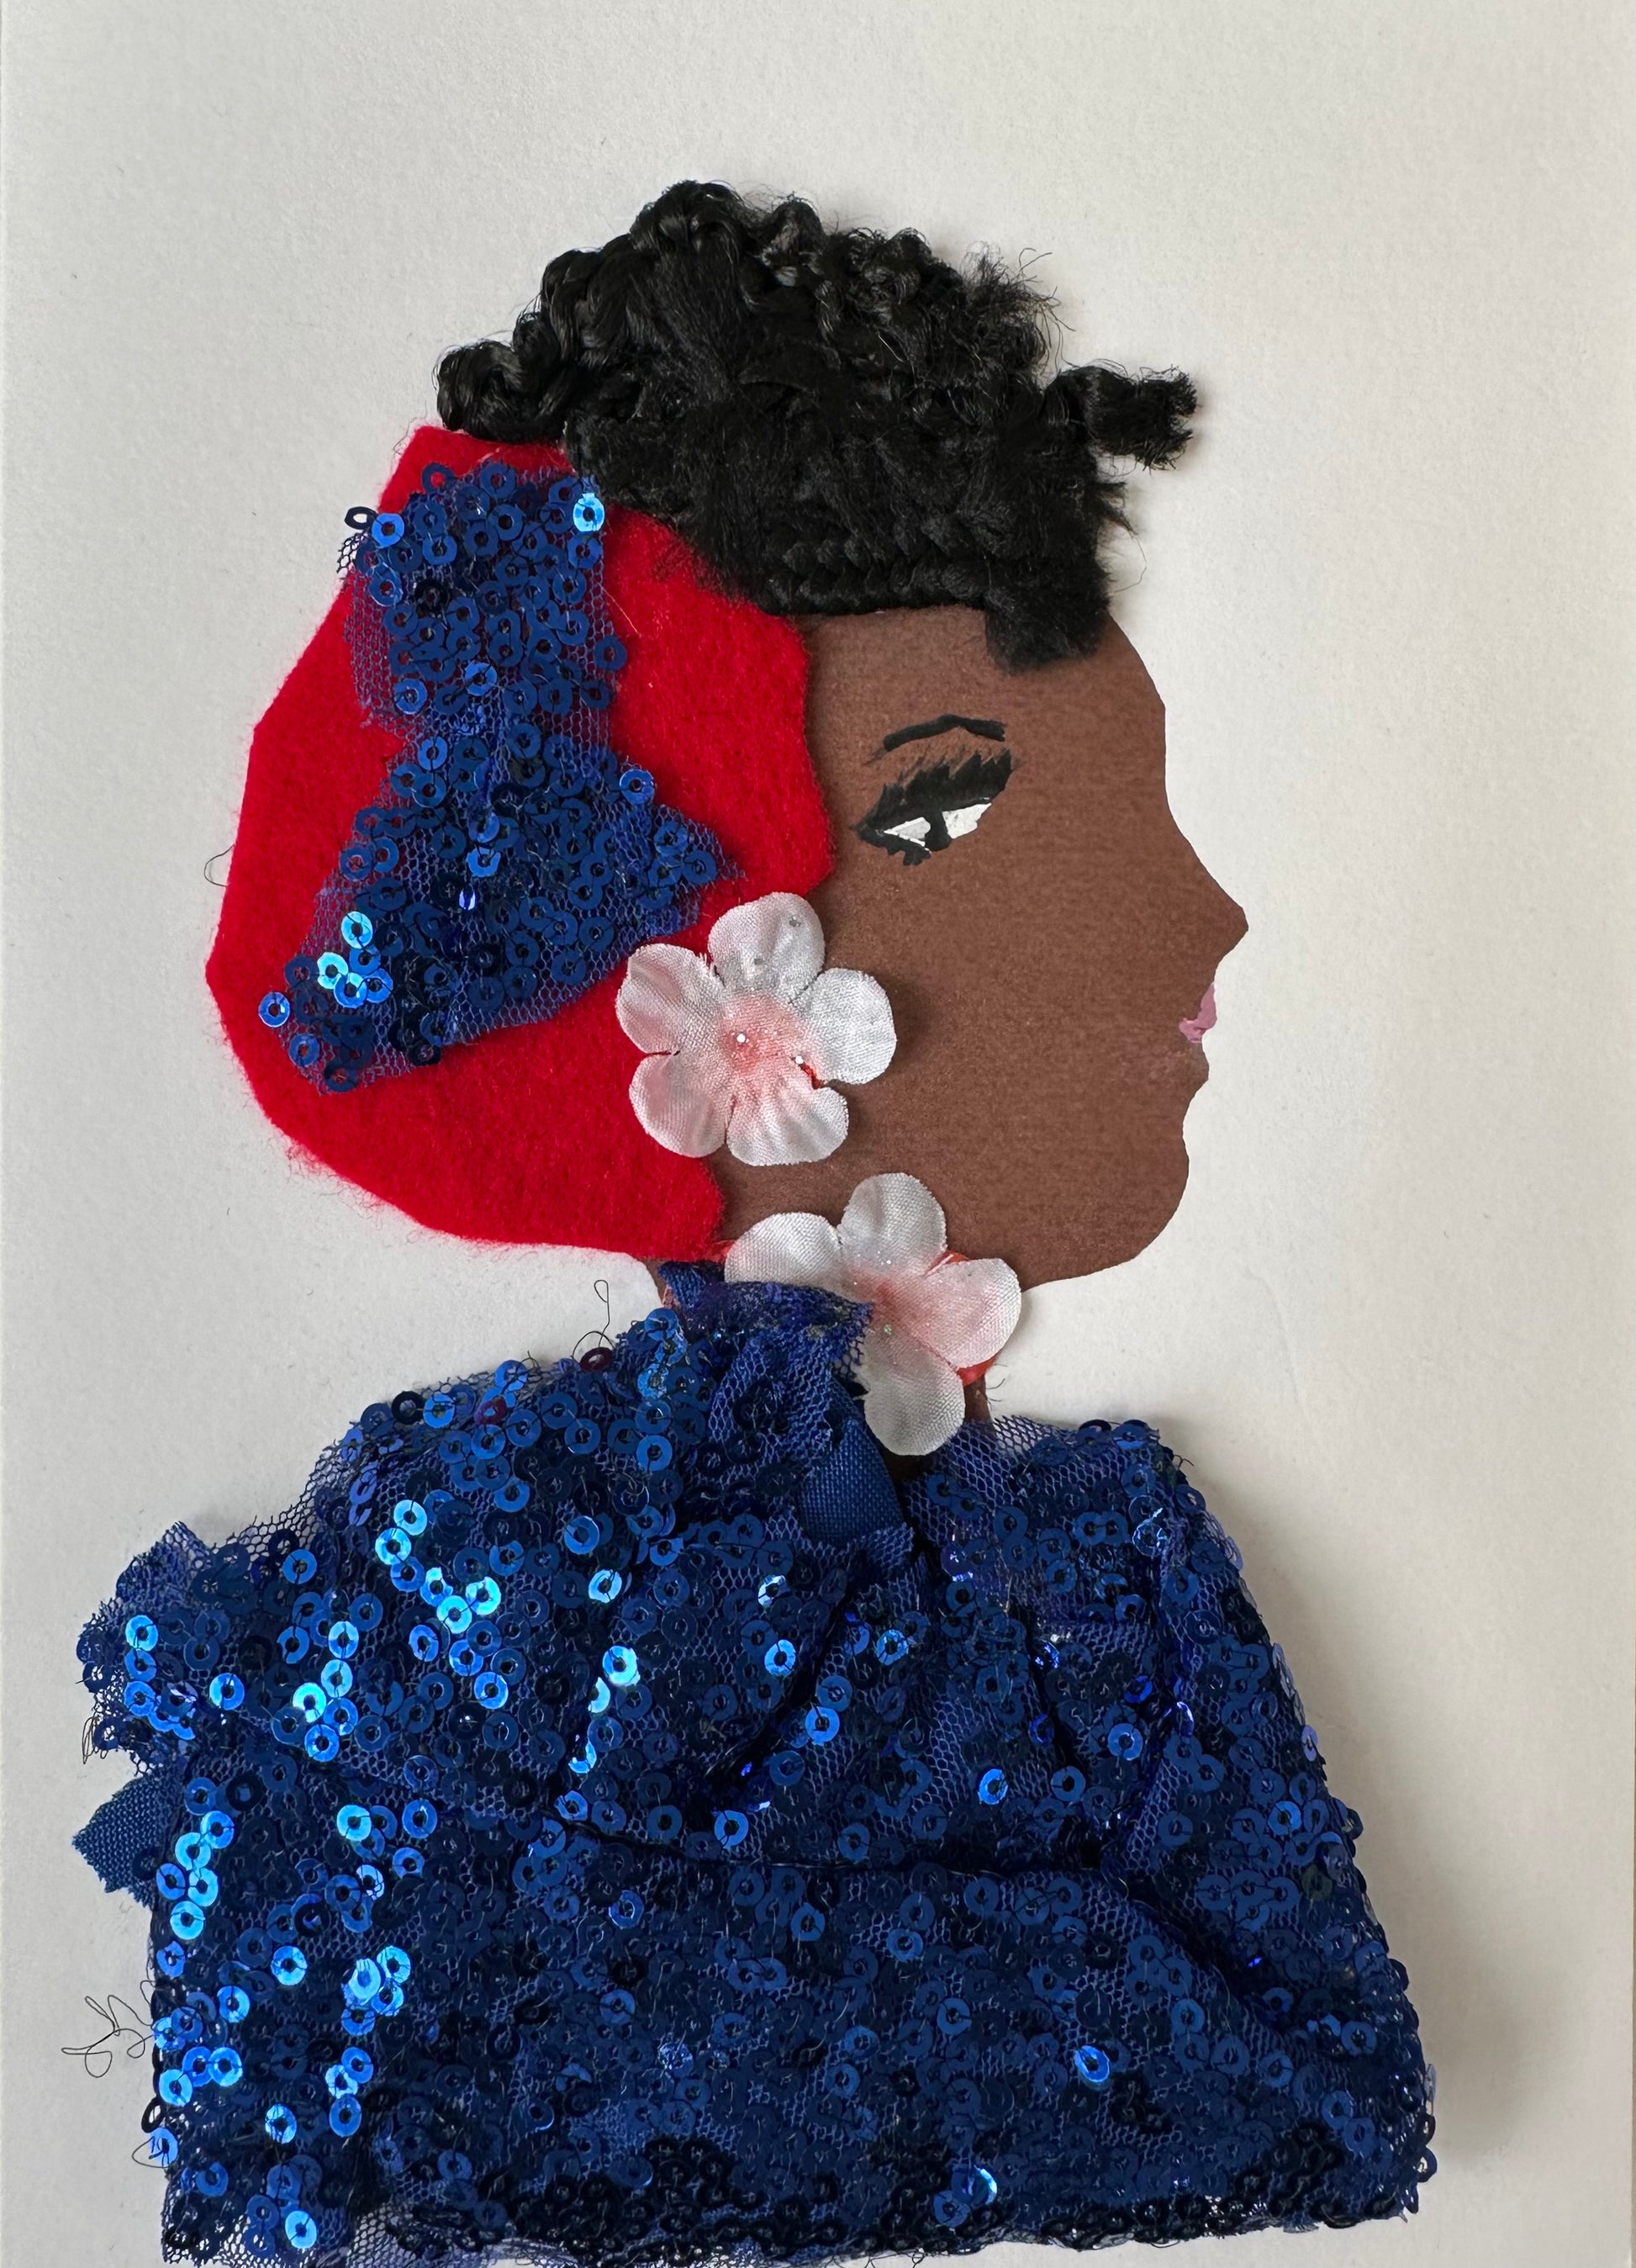 I made this handmade card of a woman dress in a dark blue sequins blouse. She has a red, felt cloth in her hair with a blue sequin bow that matches the blouse. She also has two cherry blossom flowers as jewellery. 